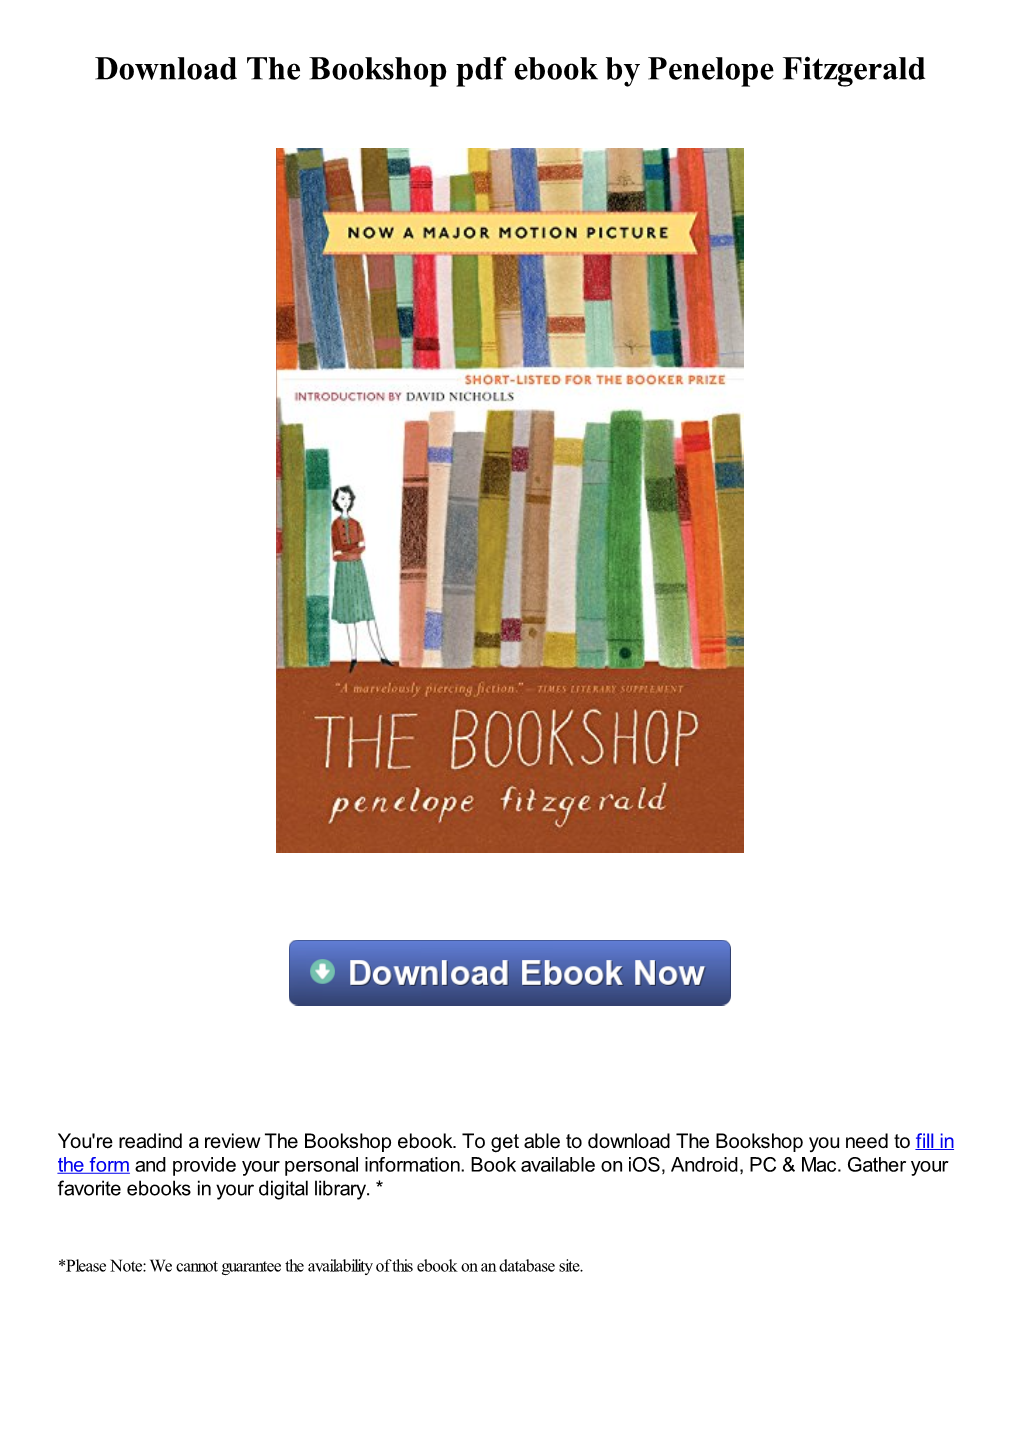 Download the Bookshop Pdf Ebook by Penelope Fitzgerald